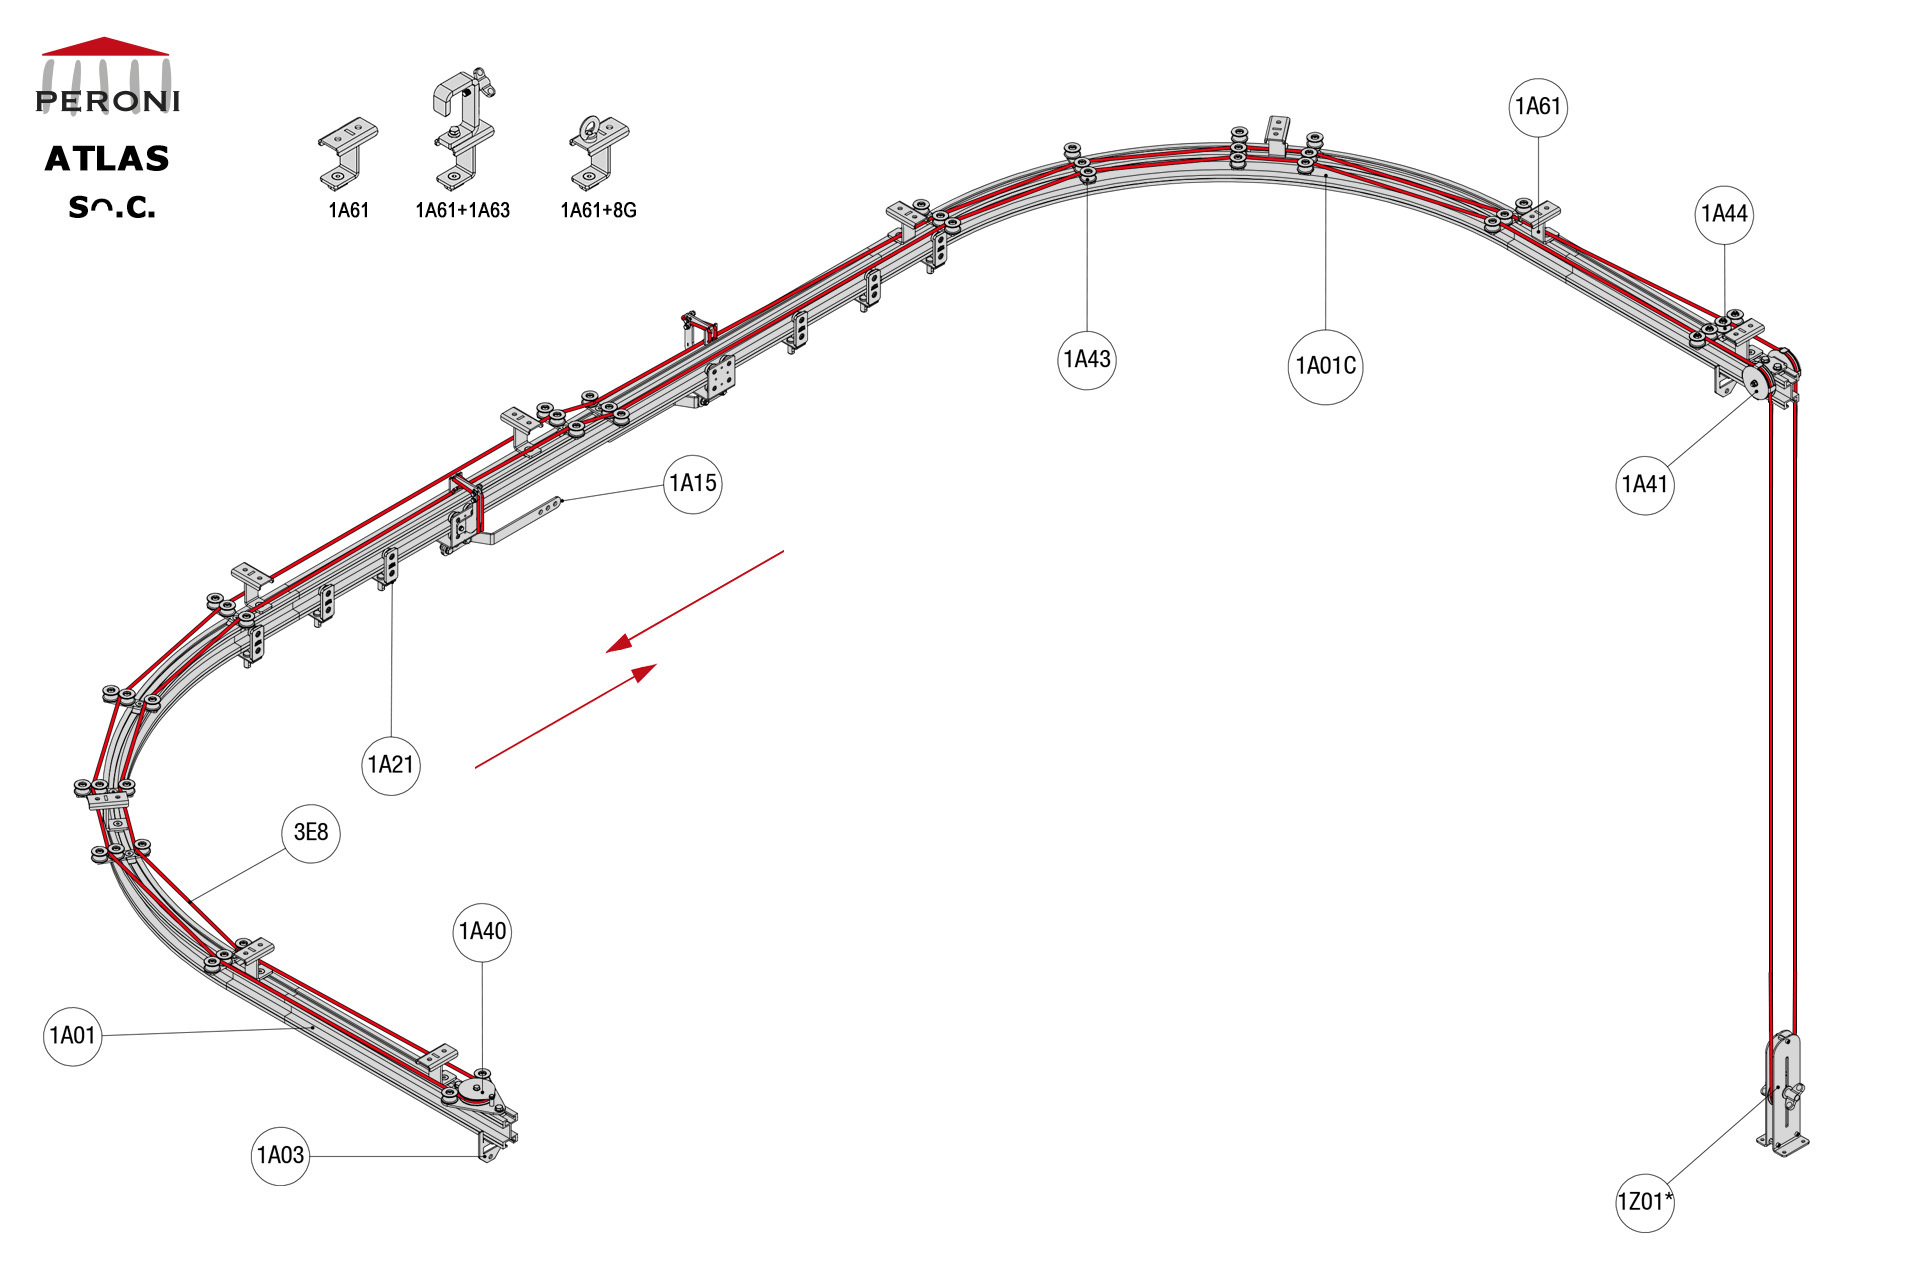 Sᴖ.C. configuration track Sᴖ. Curved single rail central openingC. Corded manualup to 50 cm central overlapComponents1A01 - Straight rail1A01C - Curved rail1A02 - Connection set1A03 - End stop1A12 - Top cord master carrier1A15 - Overlap arm1A20 - 2 Wheel runnerMotion control1A40 - Return pulley1A41 - Head double pulley1A43 - Top cord guide1A44 - Top cord aligner1Z01 - See all options3E - Poly rope  8 mm